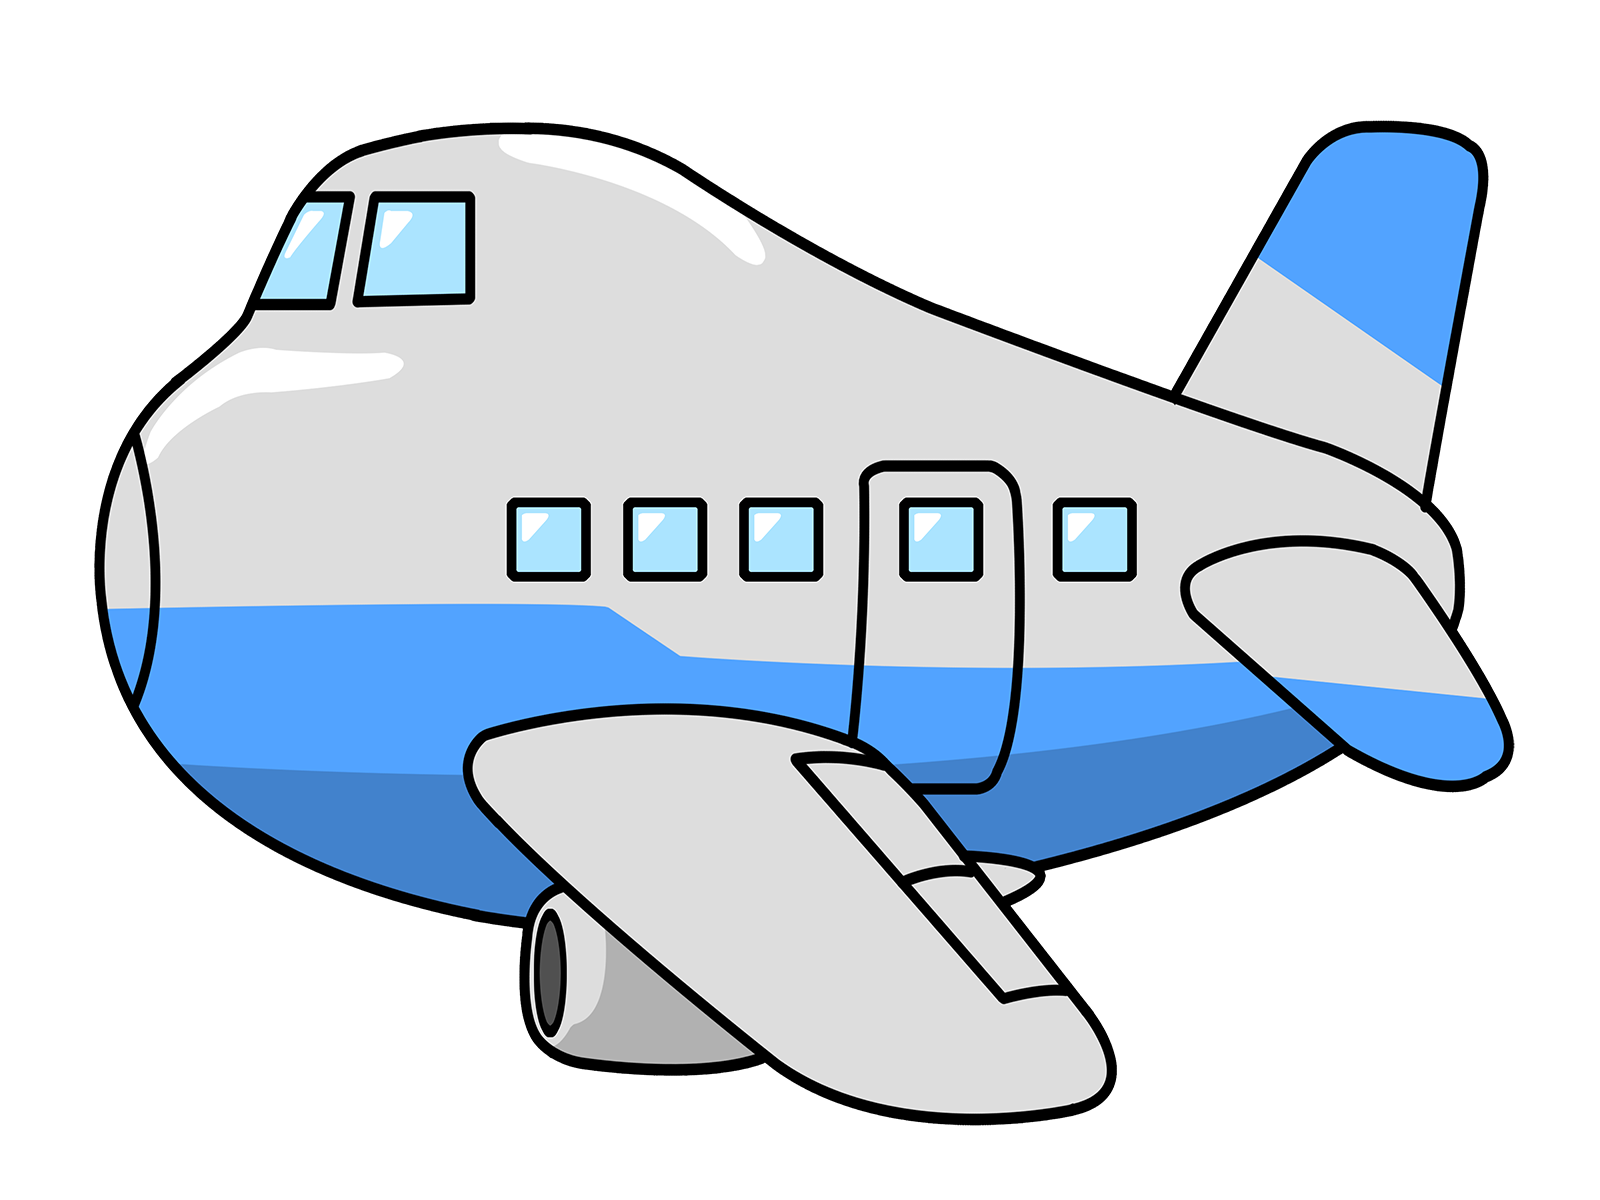 Airplane images clip art